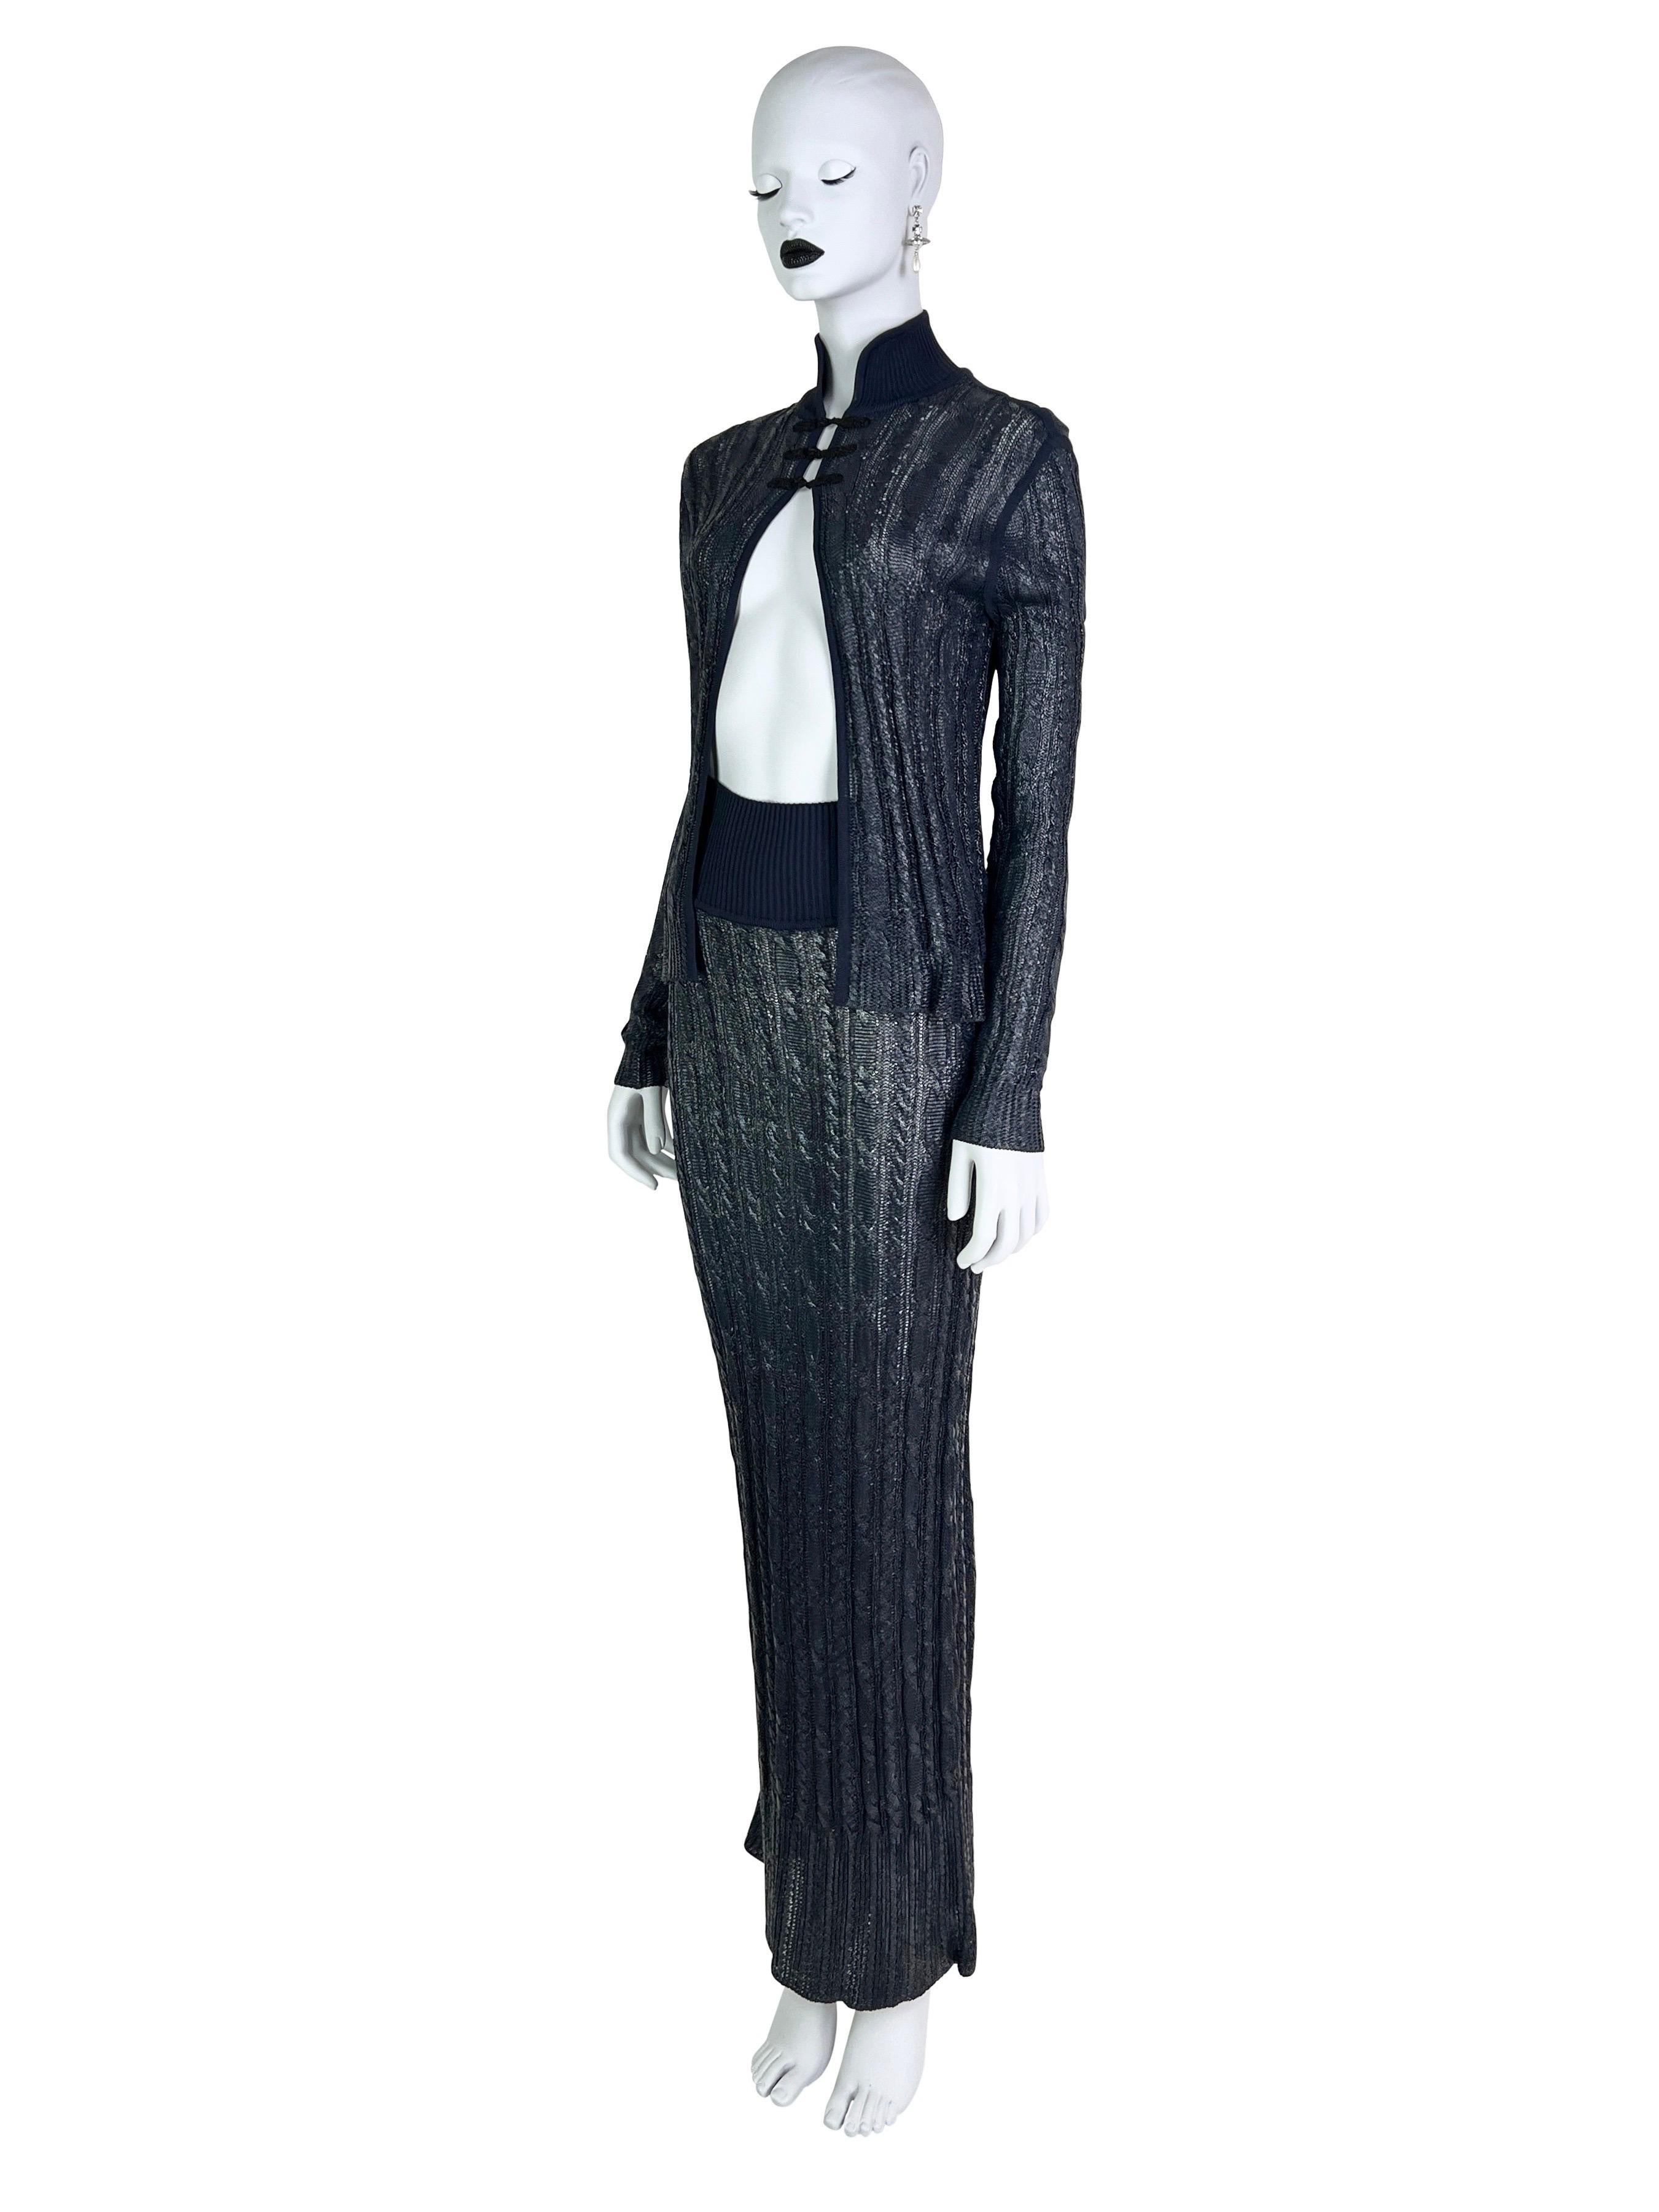 SS 1999 Dior by John Galliano RTW Rubber Knit 3-pieces ensemble For Sale 1